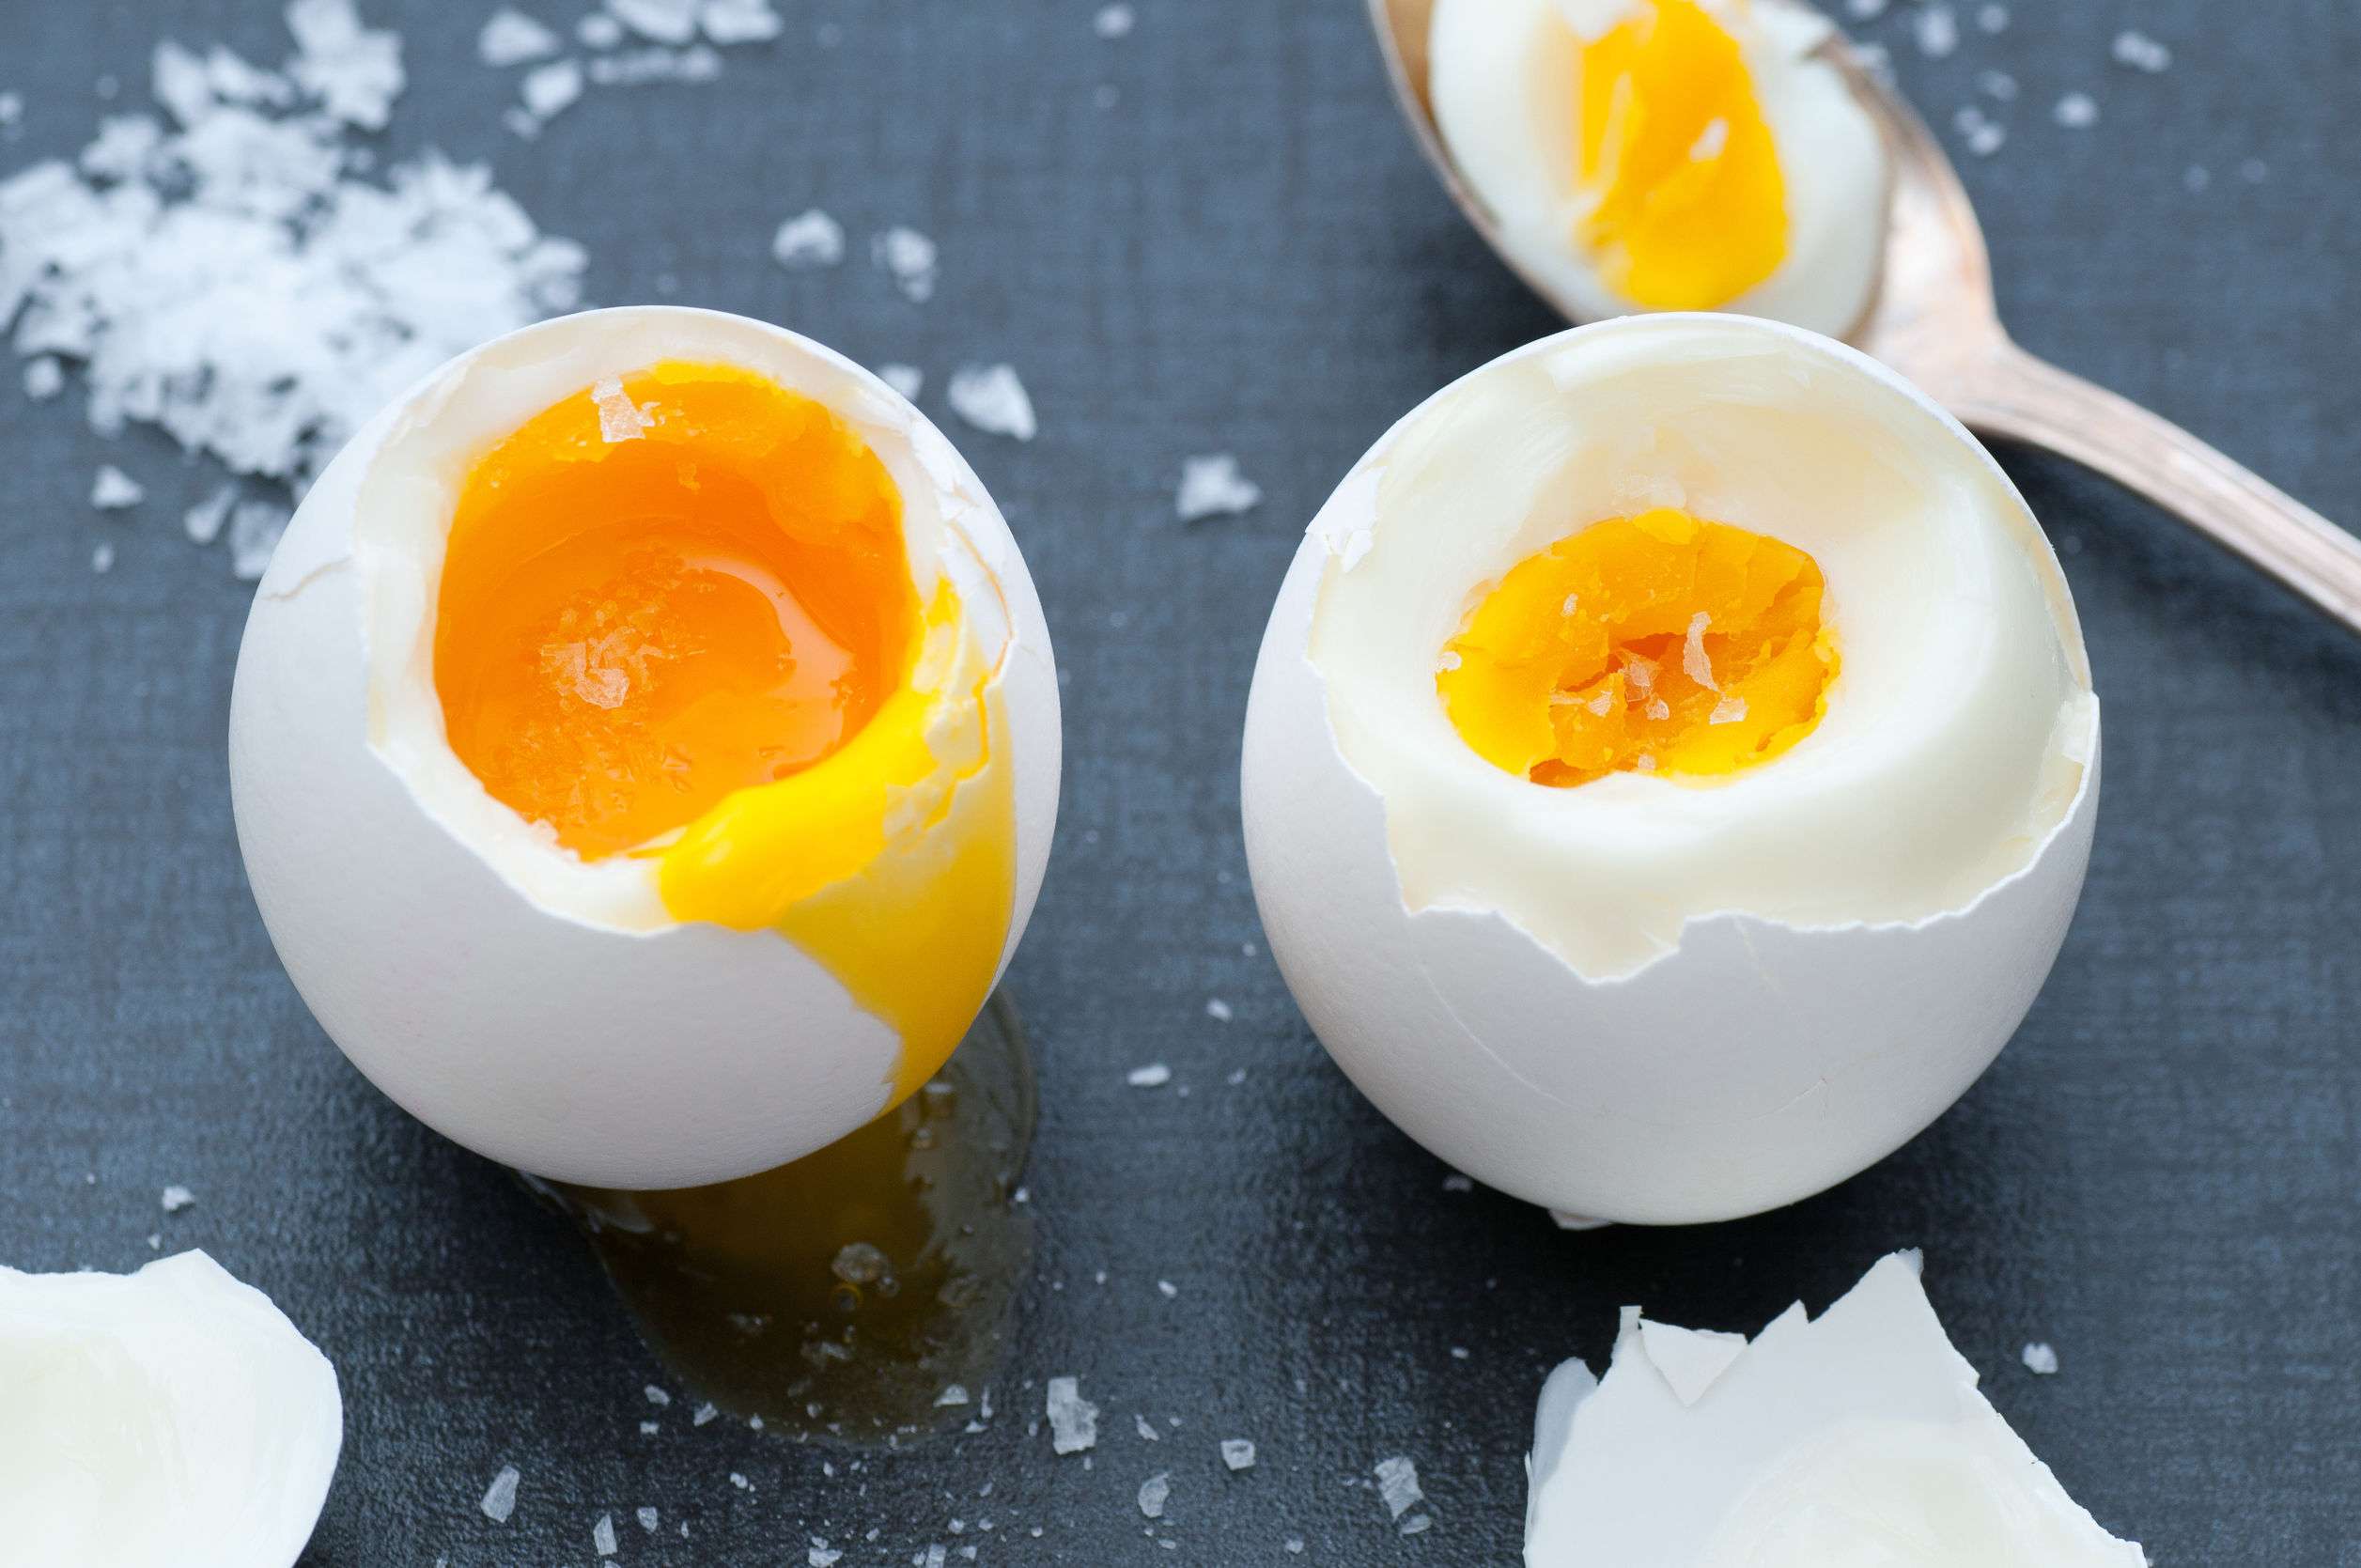 Are Eggs Good Or Bad For You? Let